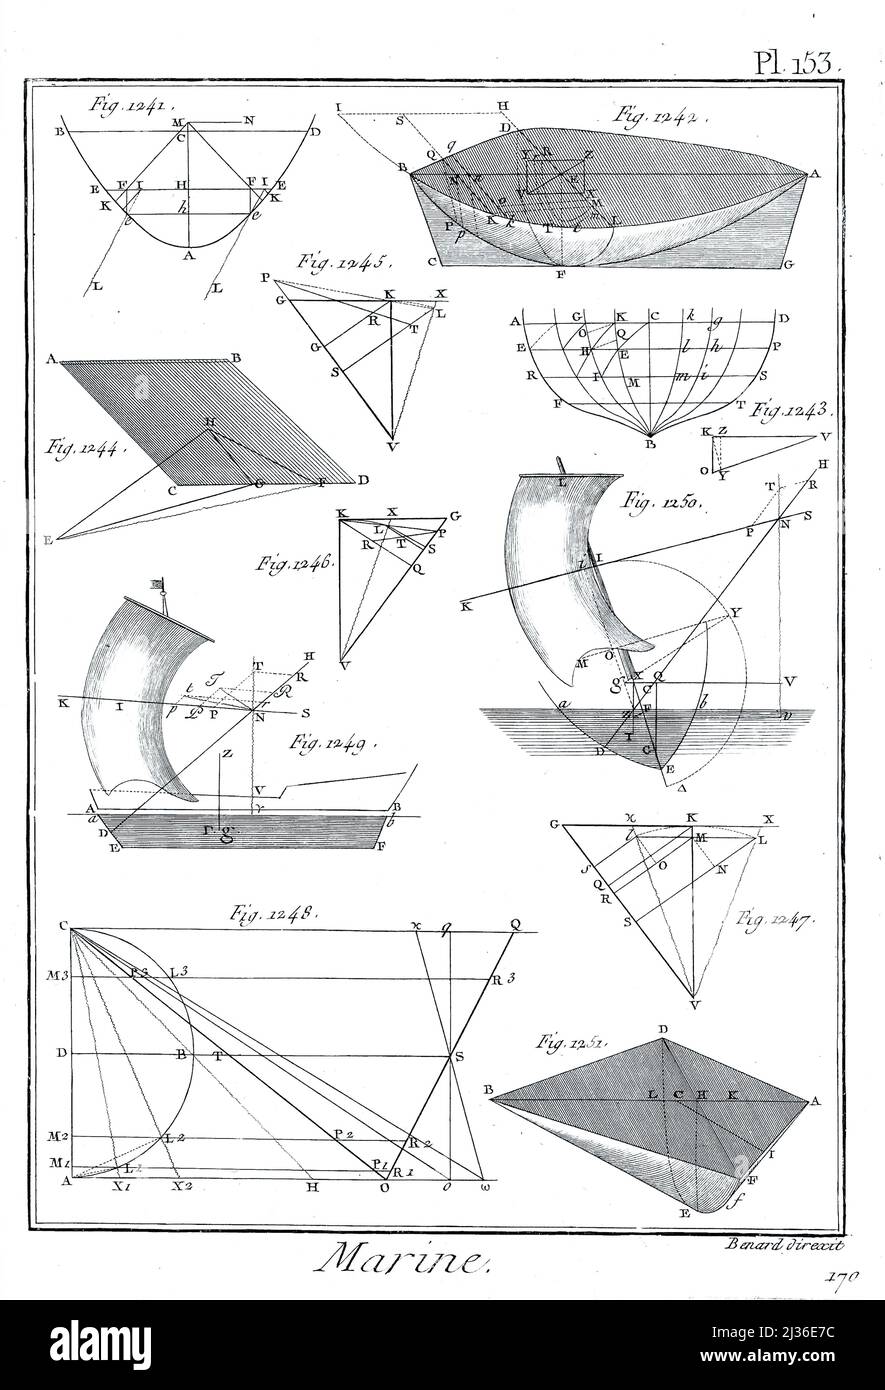 18th Century ships design From the Encyclopédie méthodique Maritime Encyclopedia Publisher Paris : Panckoucke ; Liège : Plomteux in 1787 containing drawings and blueprints of shipbuilding,  and Illustrations of maritime subjects plates drawn by Benard direxit Stock Photo